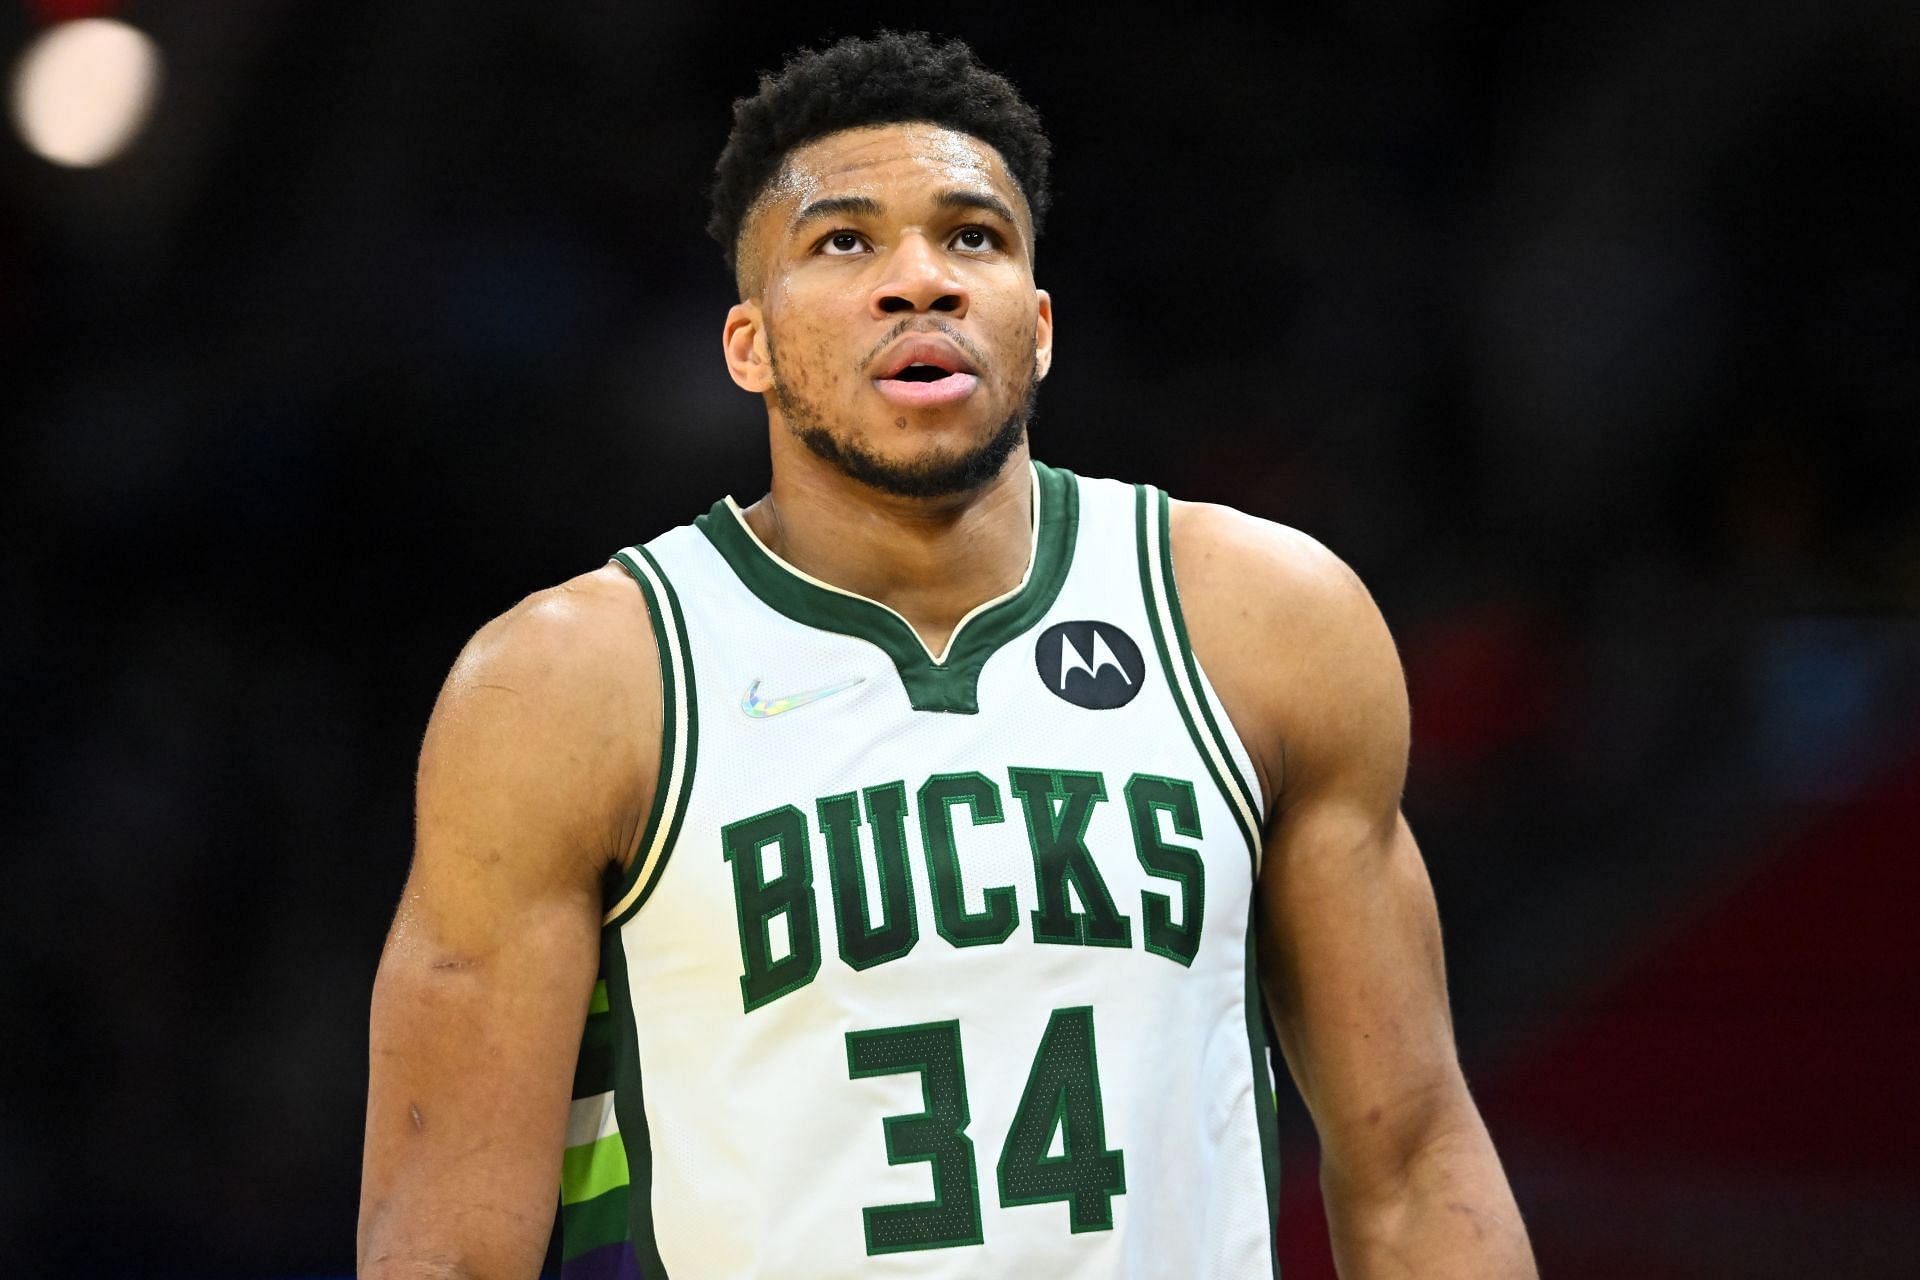 Milwaukee Bucks forward Giannis Antetokounmpo is heating up in the Defensive Player of the Year conversation